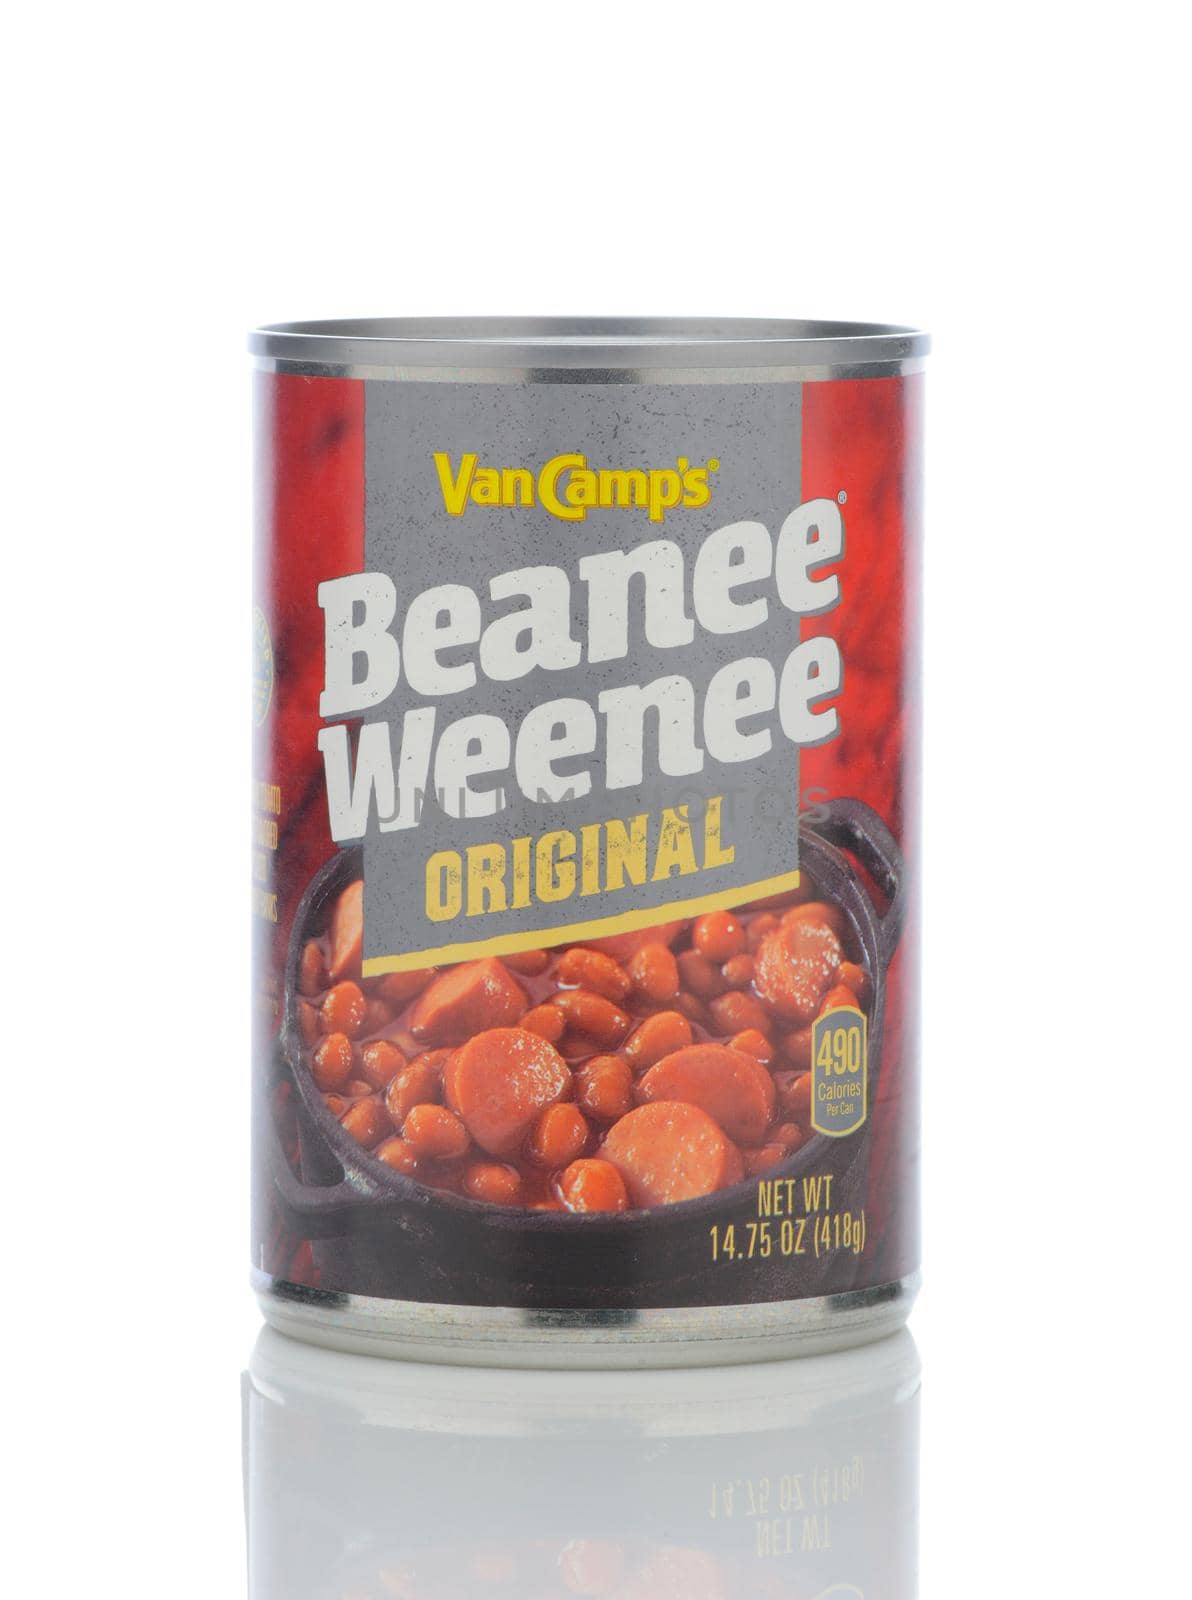 IRVINE, CALIFORNIA - MAY 23, 2019:  A can of Van Camps Beanee Weenee Original, cut up hot dogs mixed with baked beans, From Conagra Brands.